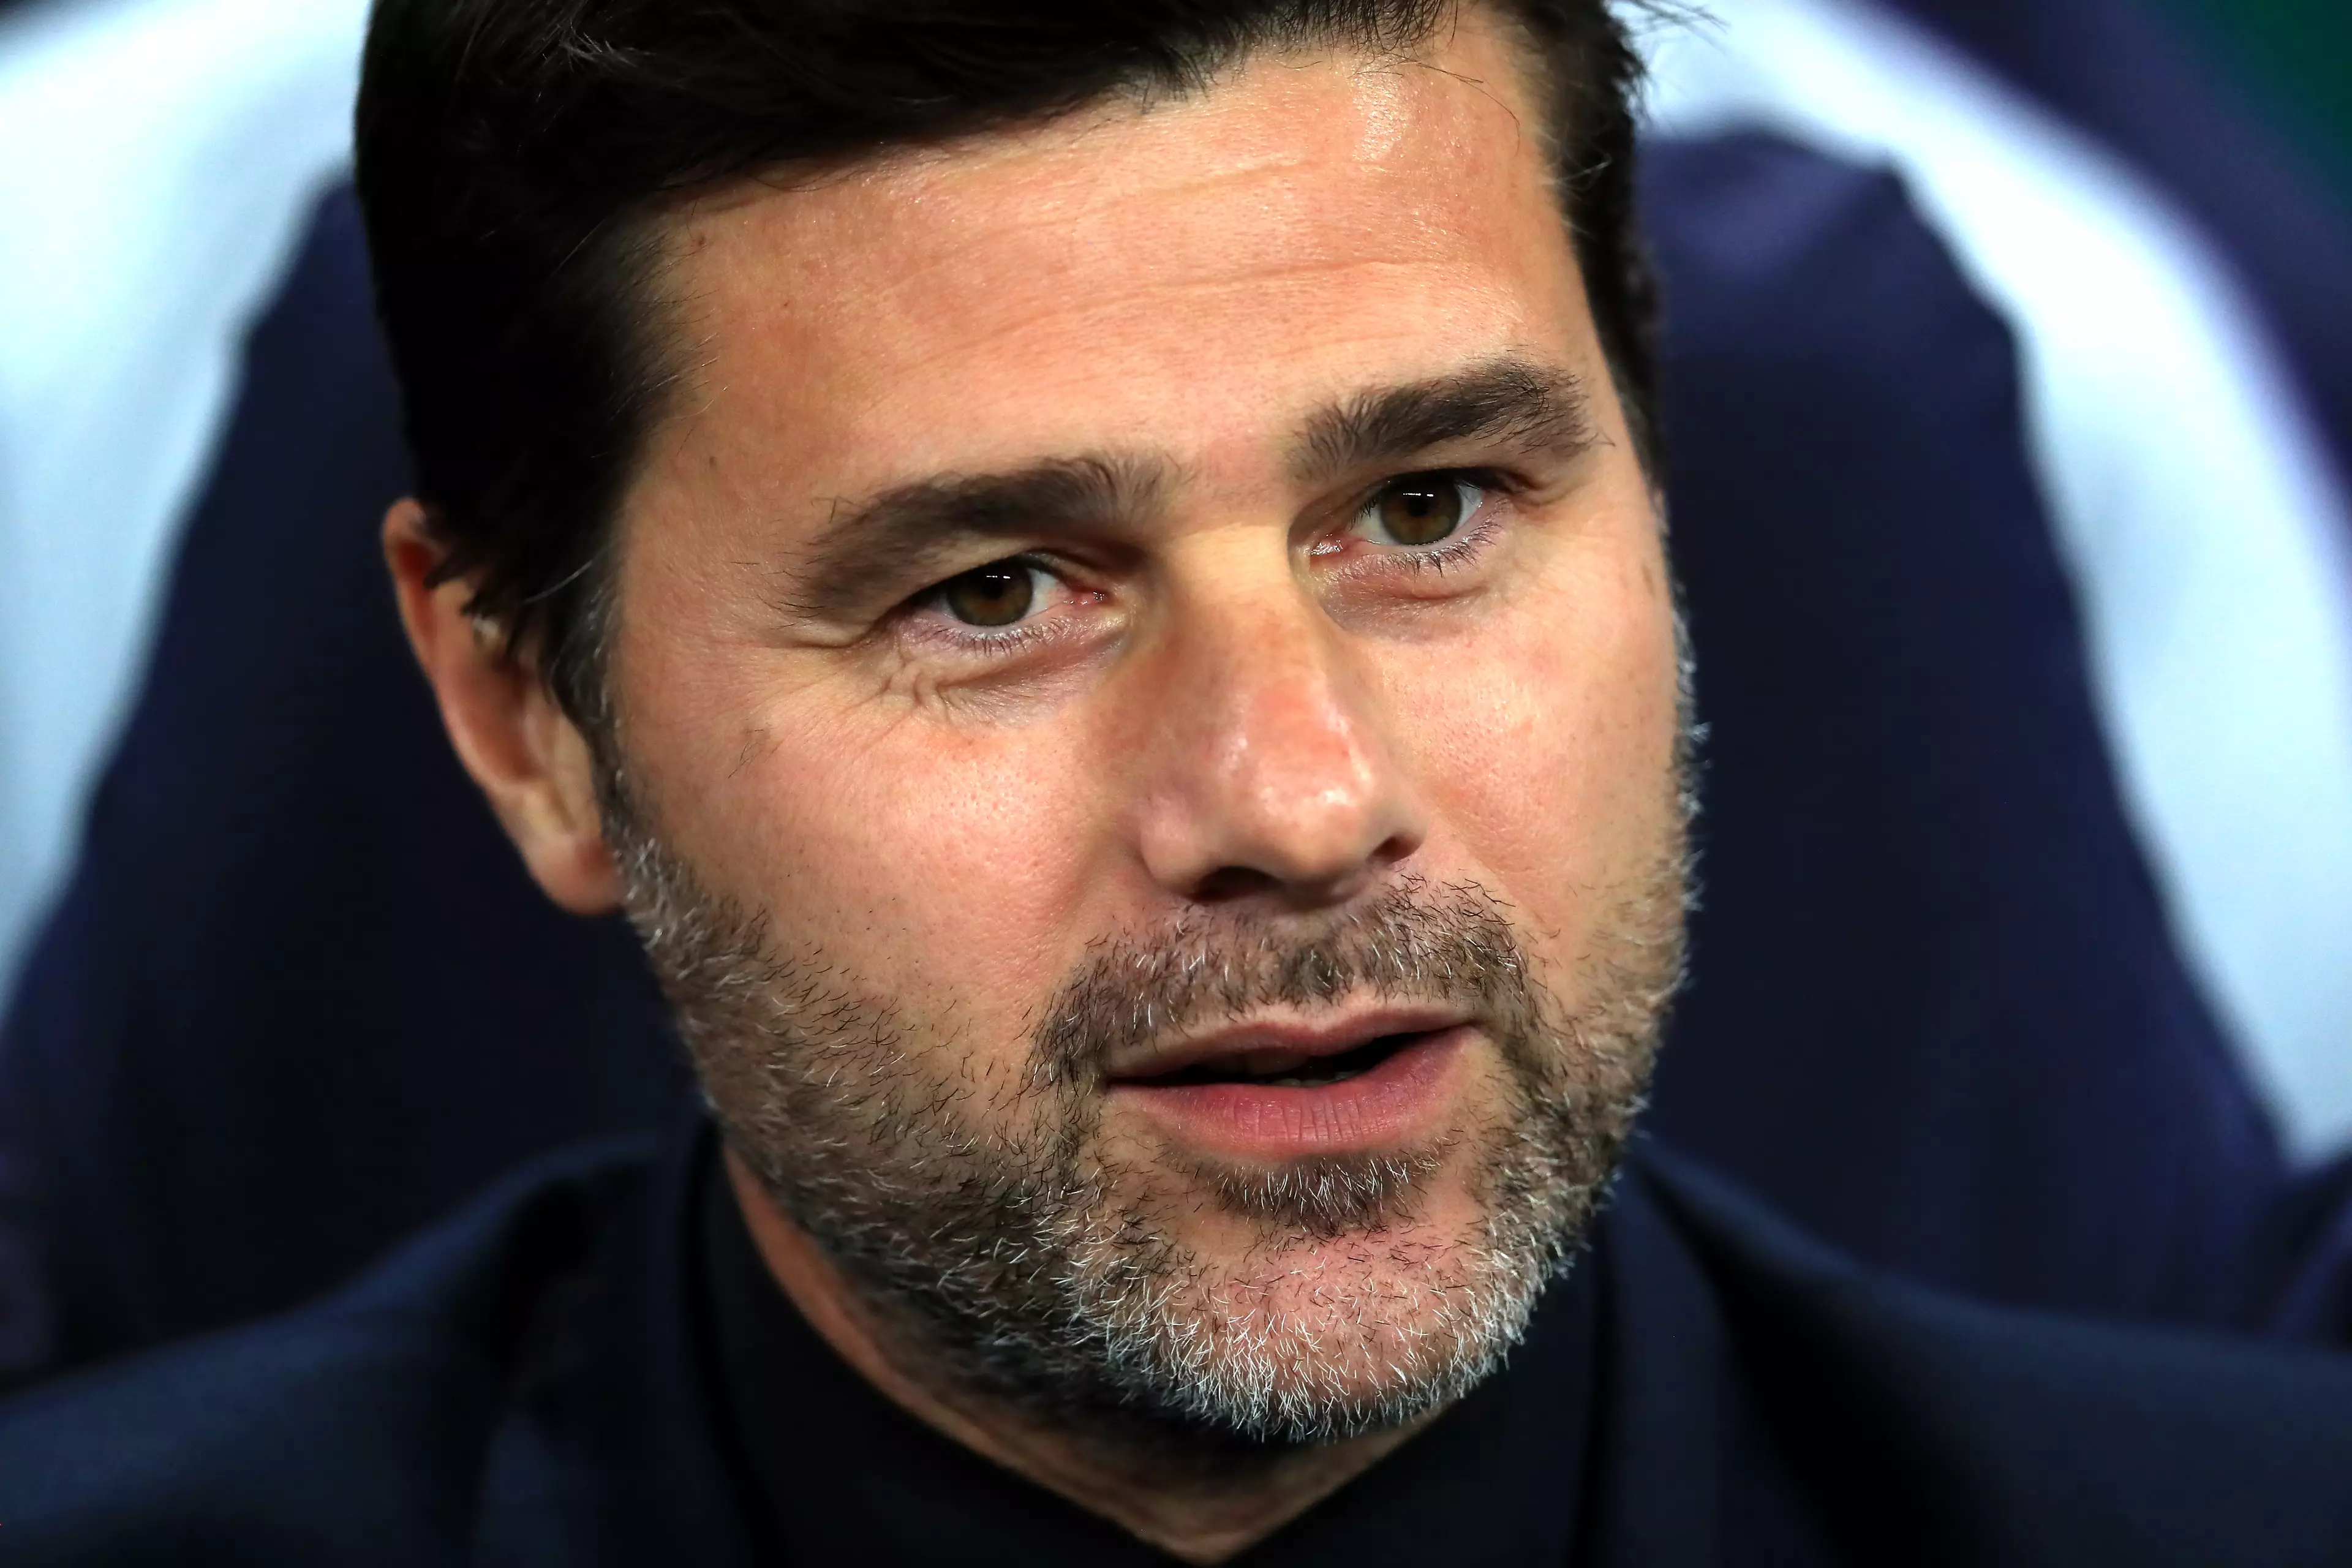 Pochettino is among the favourites to take over the reins at the club.